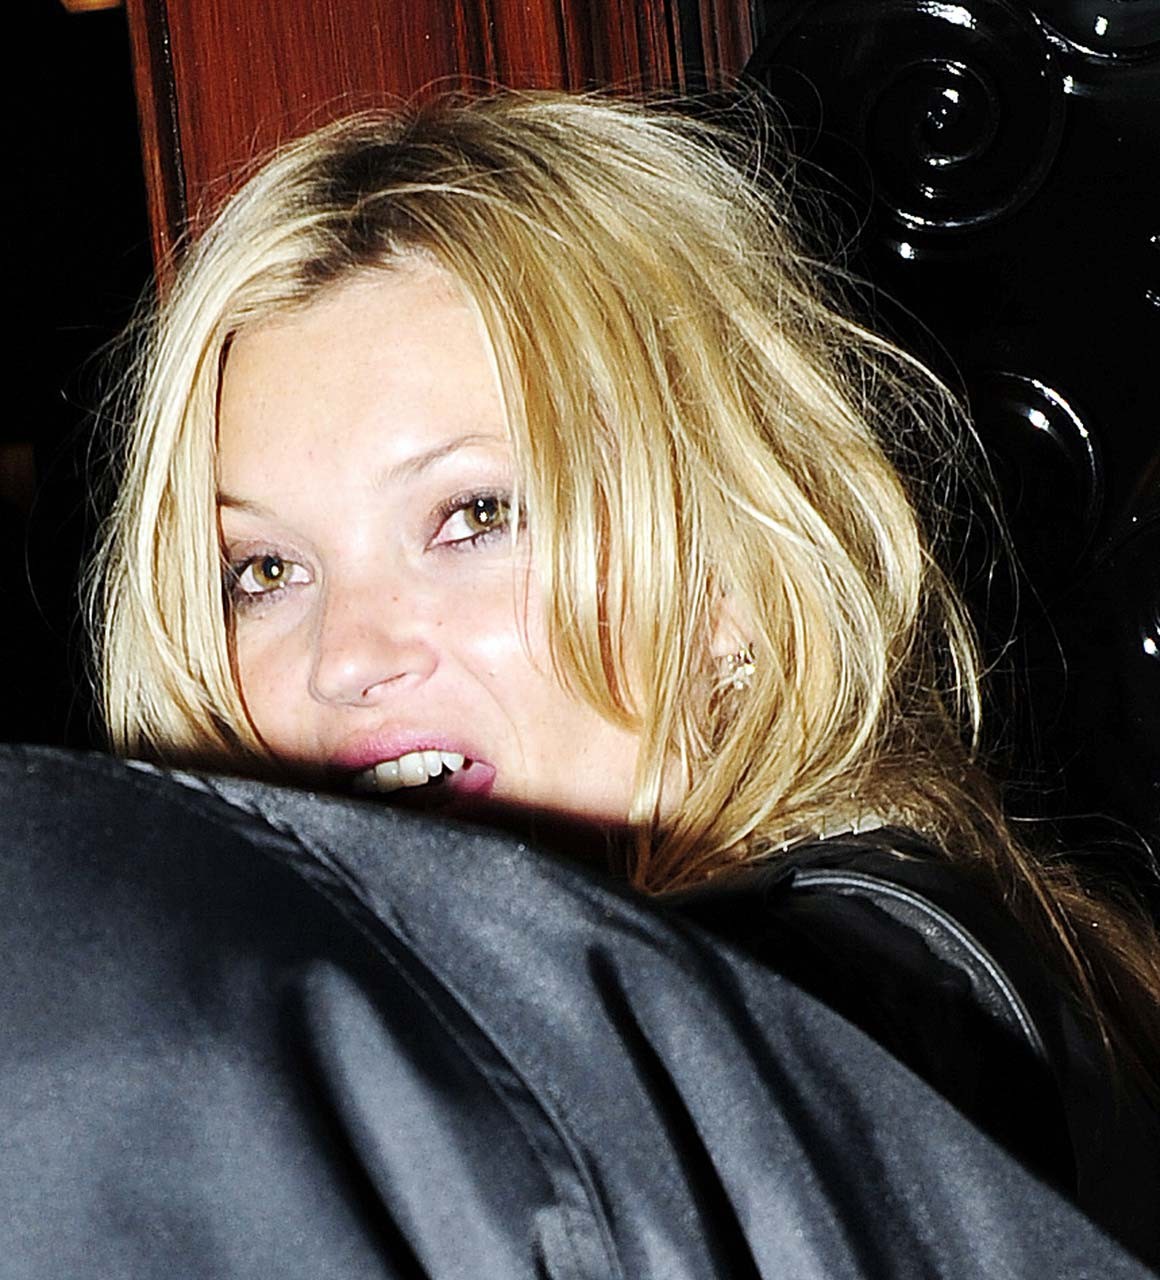 Kate Moss flashing her panties upskirt in car and exposing her boobs on beach #75304682